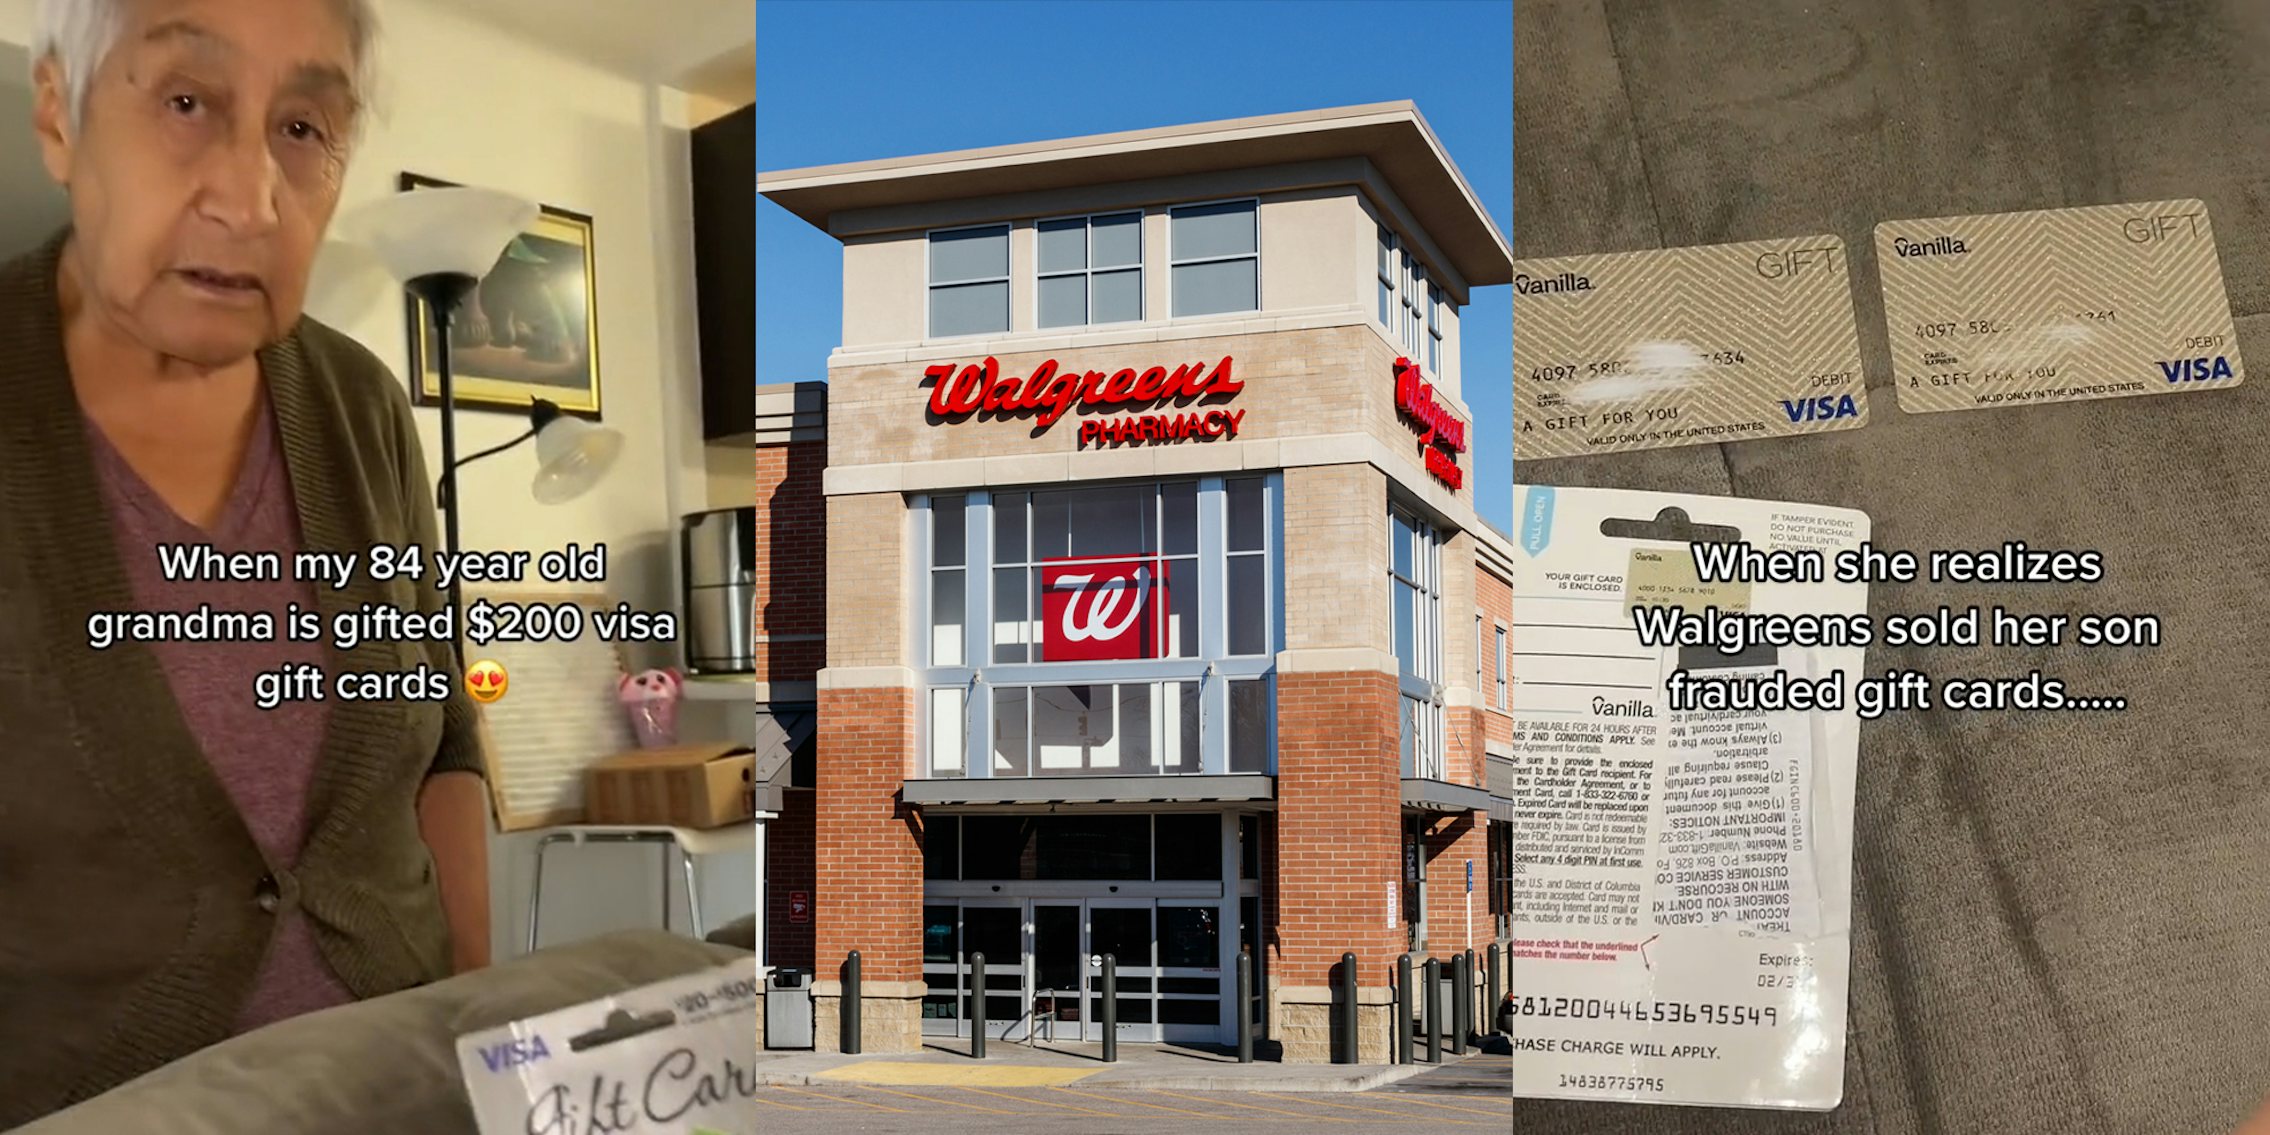 woman with gift card in corner with caption 'When my 84 year old grandma is gifted $200 visa gift cards' (l) Walgreens Pharmacy building with sign (c) Visa gift cards with caption 'When she realizes Walgreens sold her son frauded gift cards...' (r)